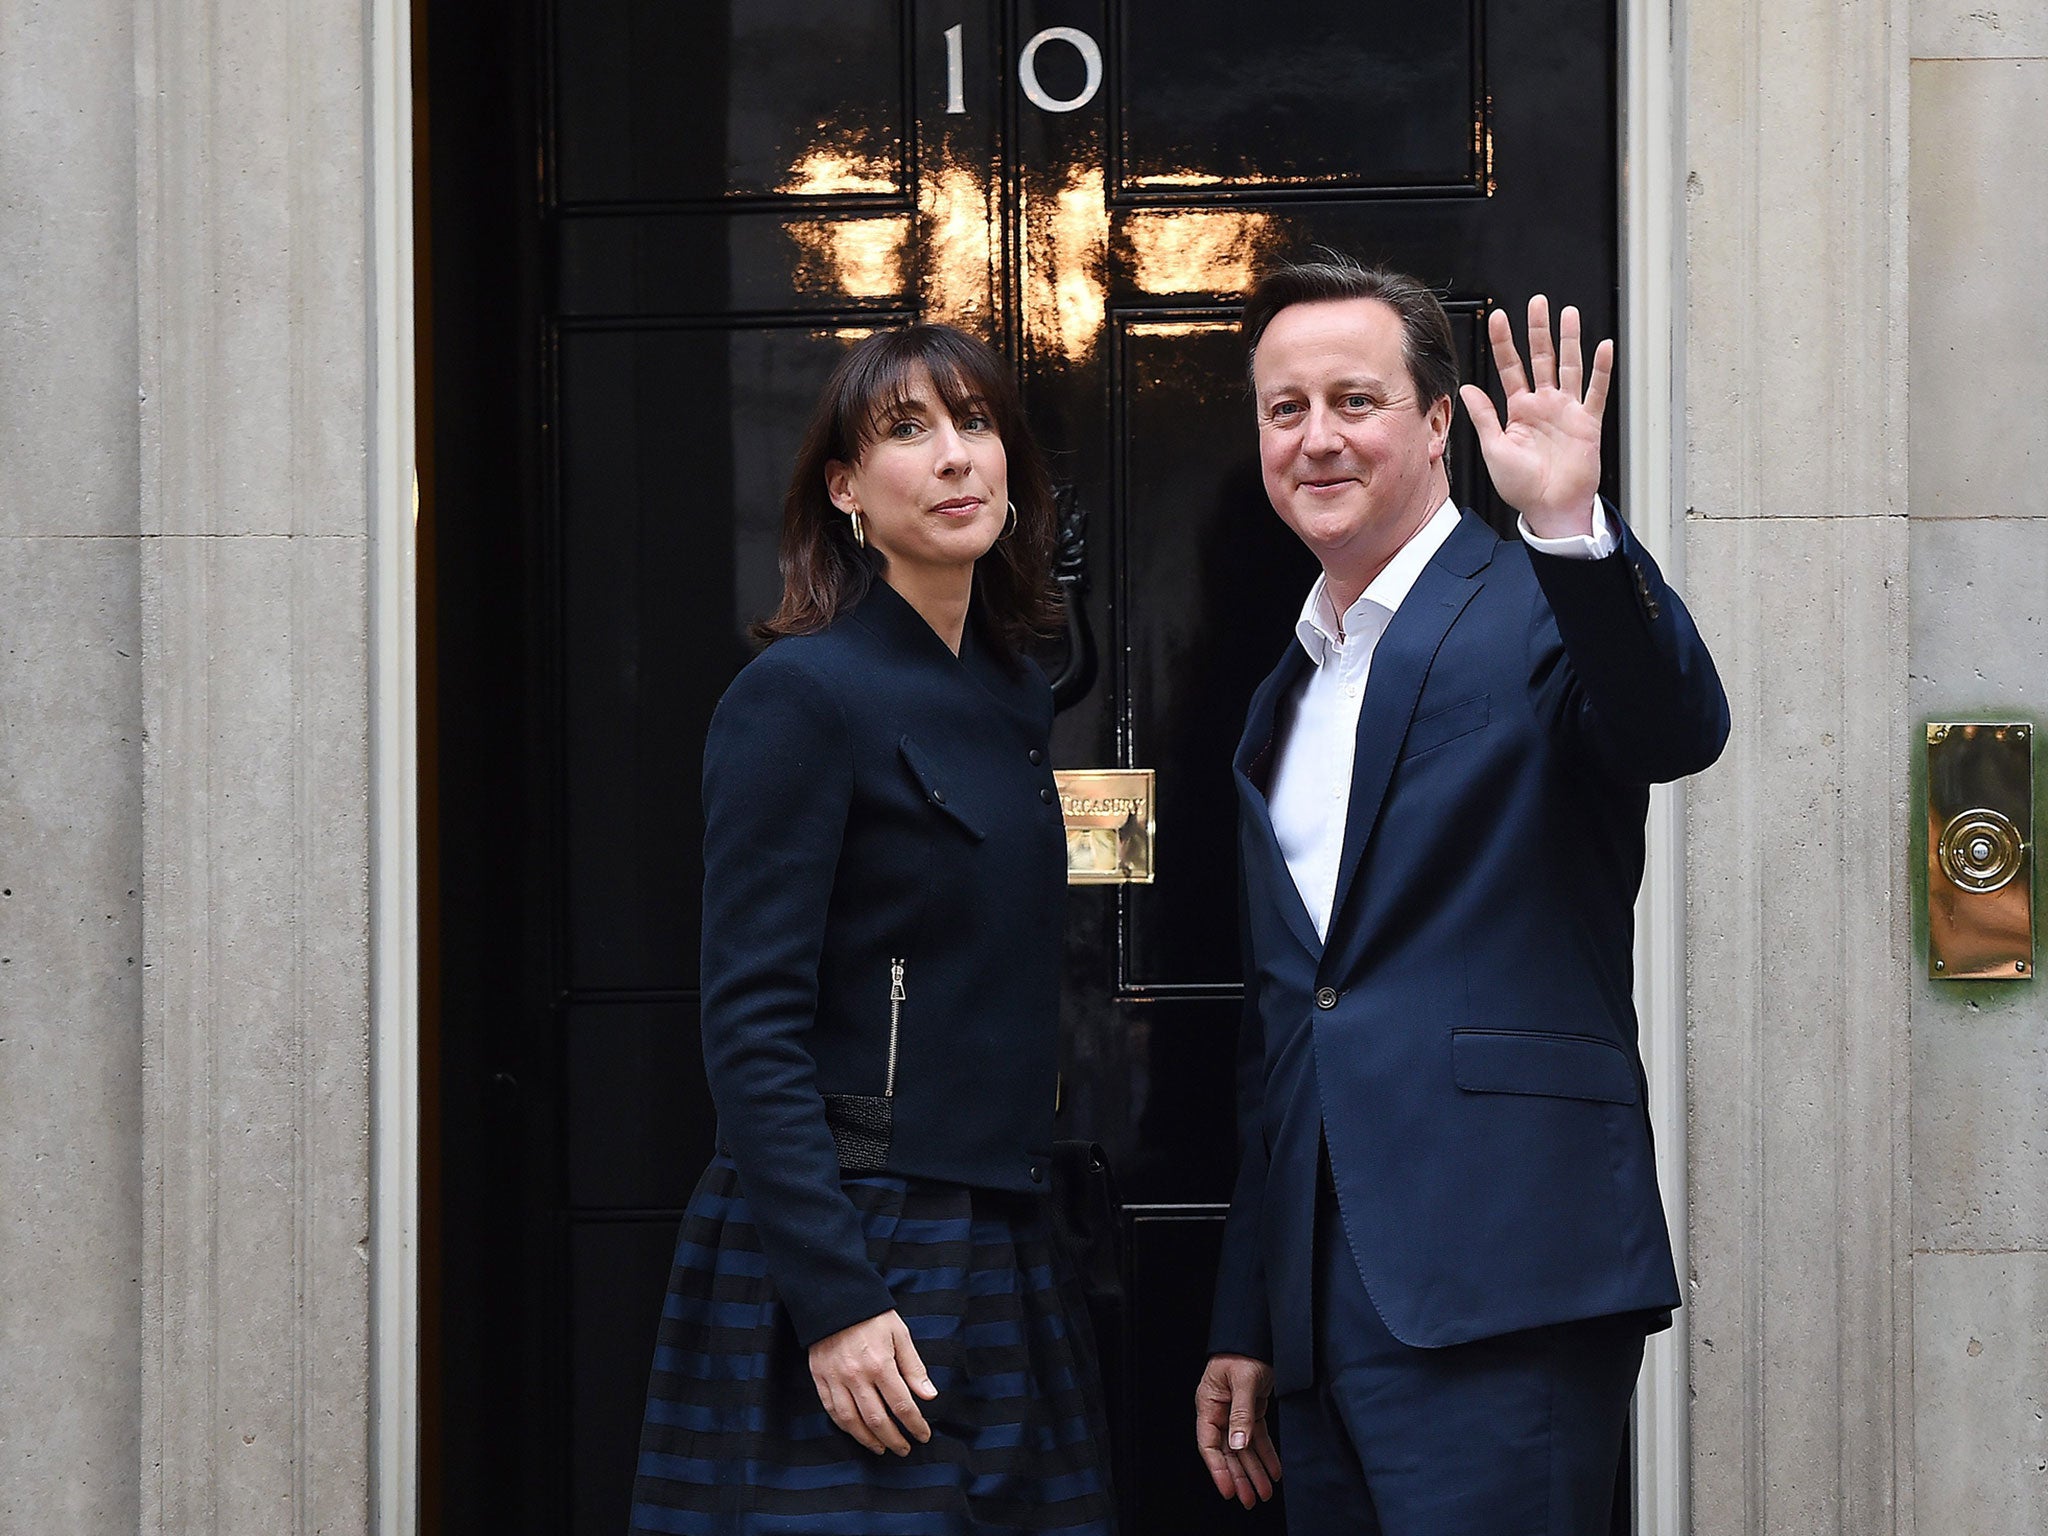 Prime Minister David Cameron and his wife Samantha arrive to N10 Downing street in London